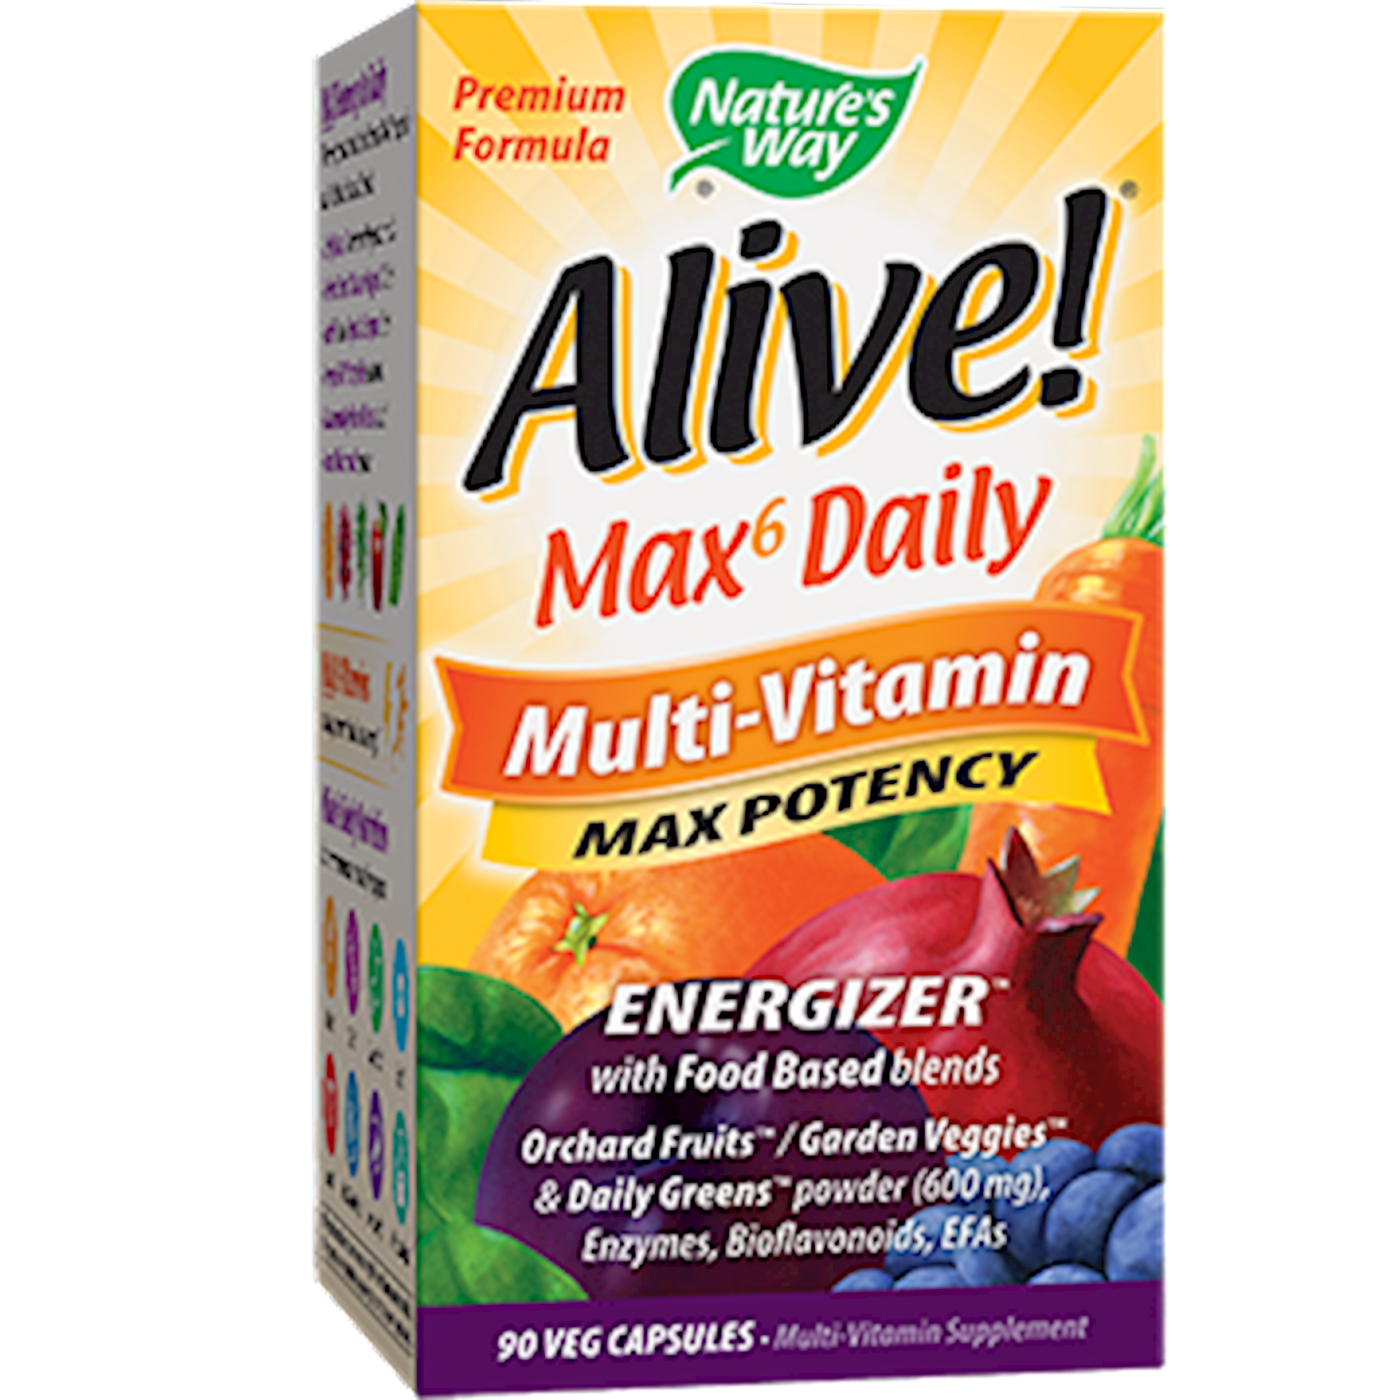 Alive! Max6 Daily (with iron) 90vcaps Curated Wellness